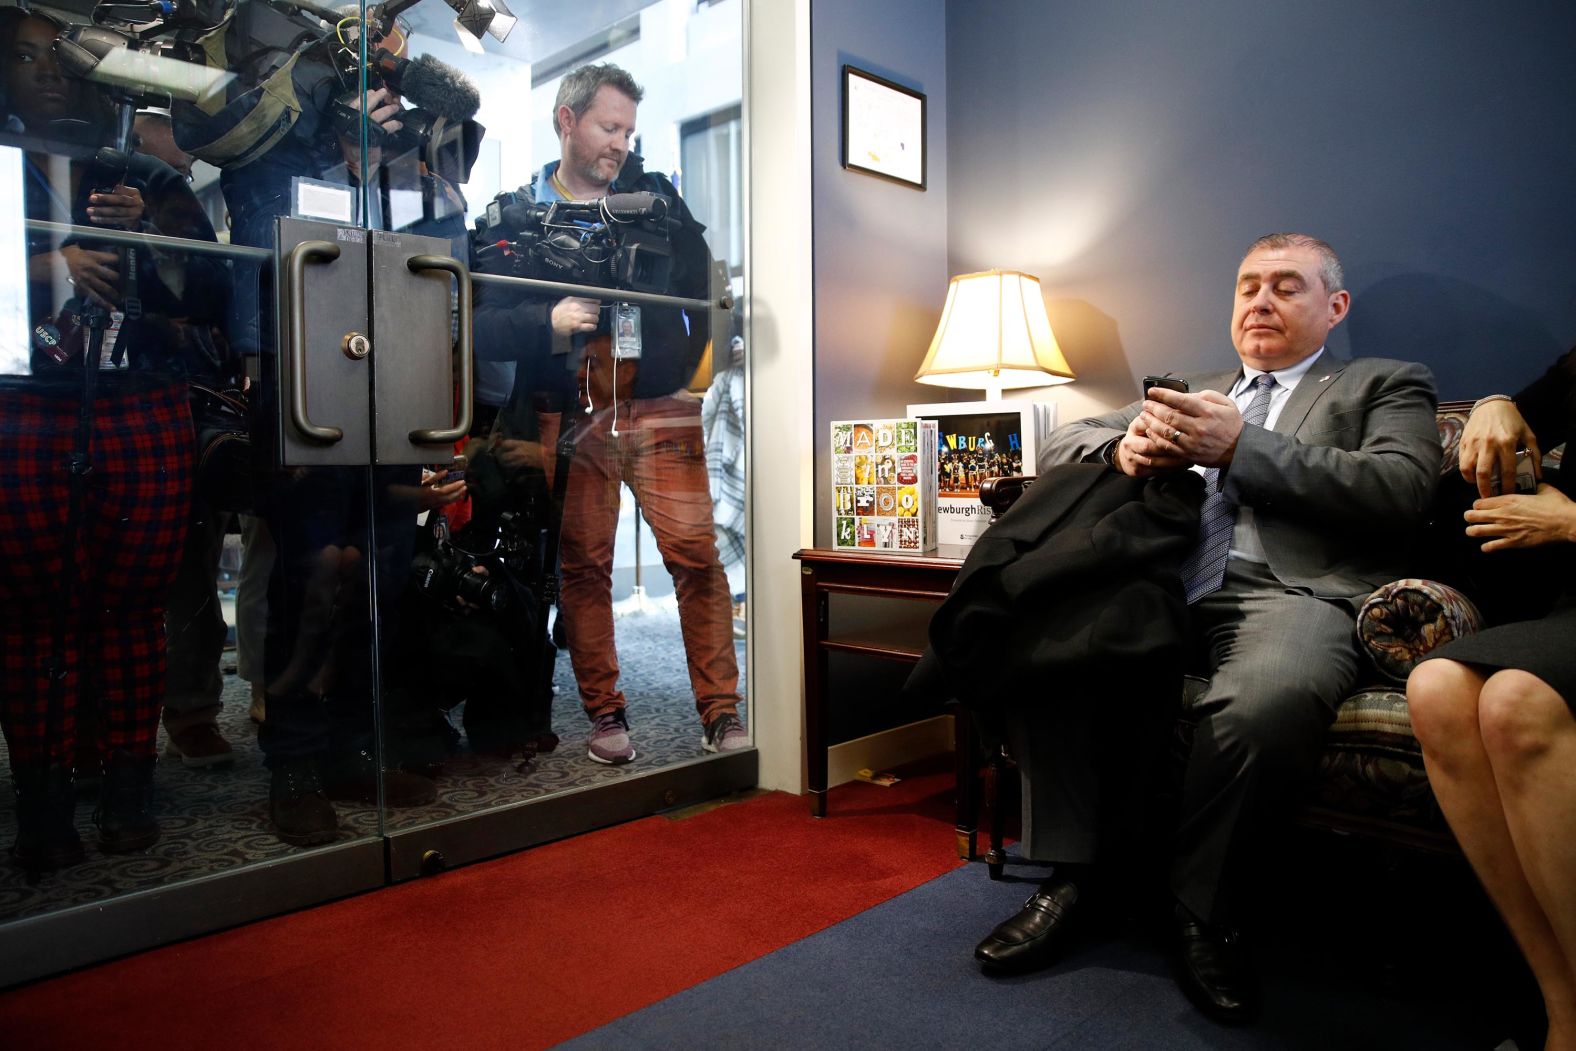 Lev Parnas, an indicted associate of Rudy Giuliani with ties to Ukraine, looks at his phone as he waits in the office of Senate Minority Leader Chuck Schumer on January 29. Parnas' work in Ukraine with Giuliani, the President's personal attorney, <a href="index.php?page=&url=https%3A%2F%2Fwww.cnn.com%2F2020%2F01%2F16%2Fpolitics%2Flev-parnas-cnn-interview%2Findex.html" target="_blank">stood at the center of the impeachment inquiry.</a>